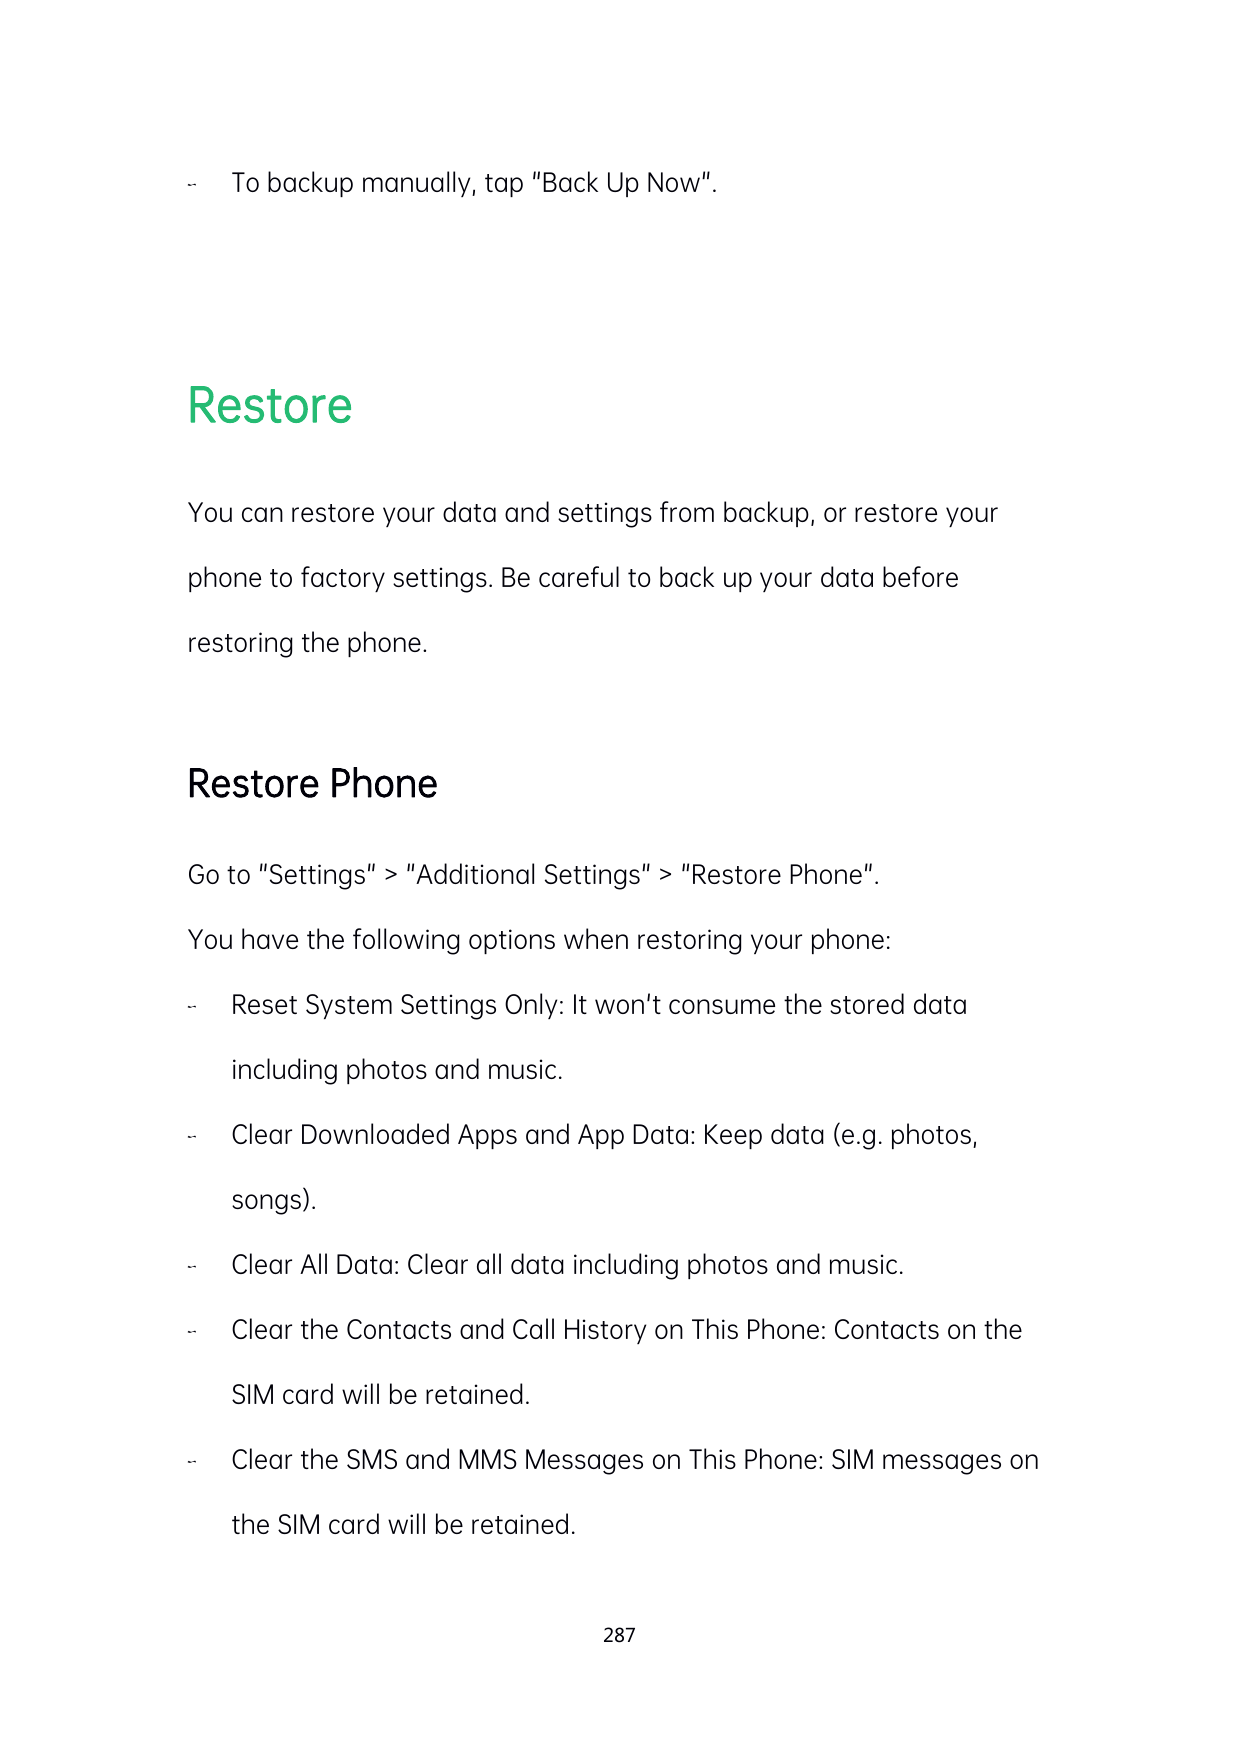 To backup manually, tap "Back Up Now".RestoreYou can restore your data and settings from backup, or restore yourphone to factor